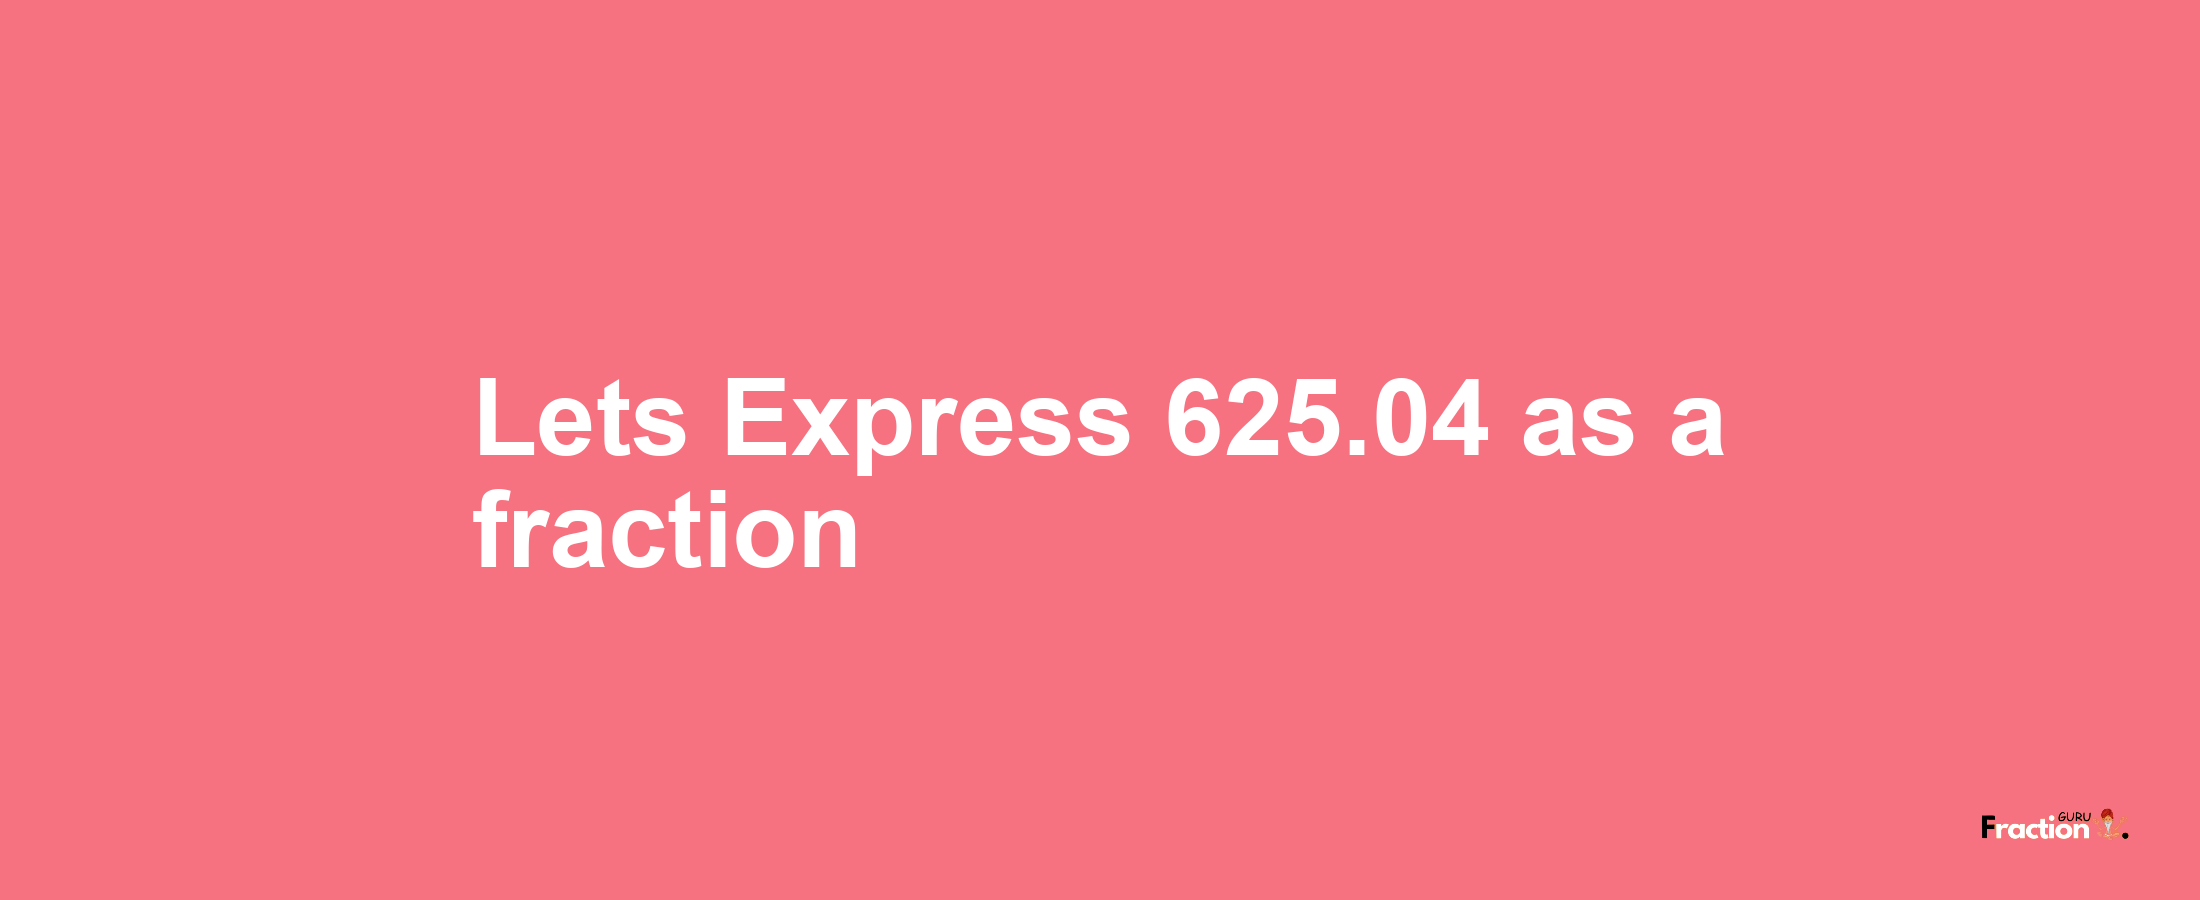 Lets Express 625.04 as afraction